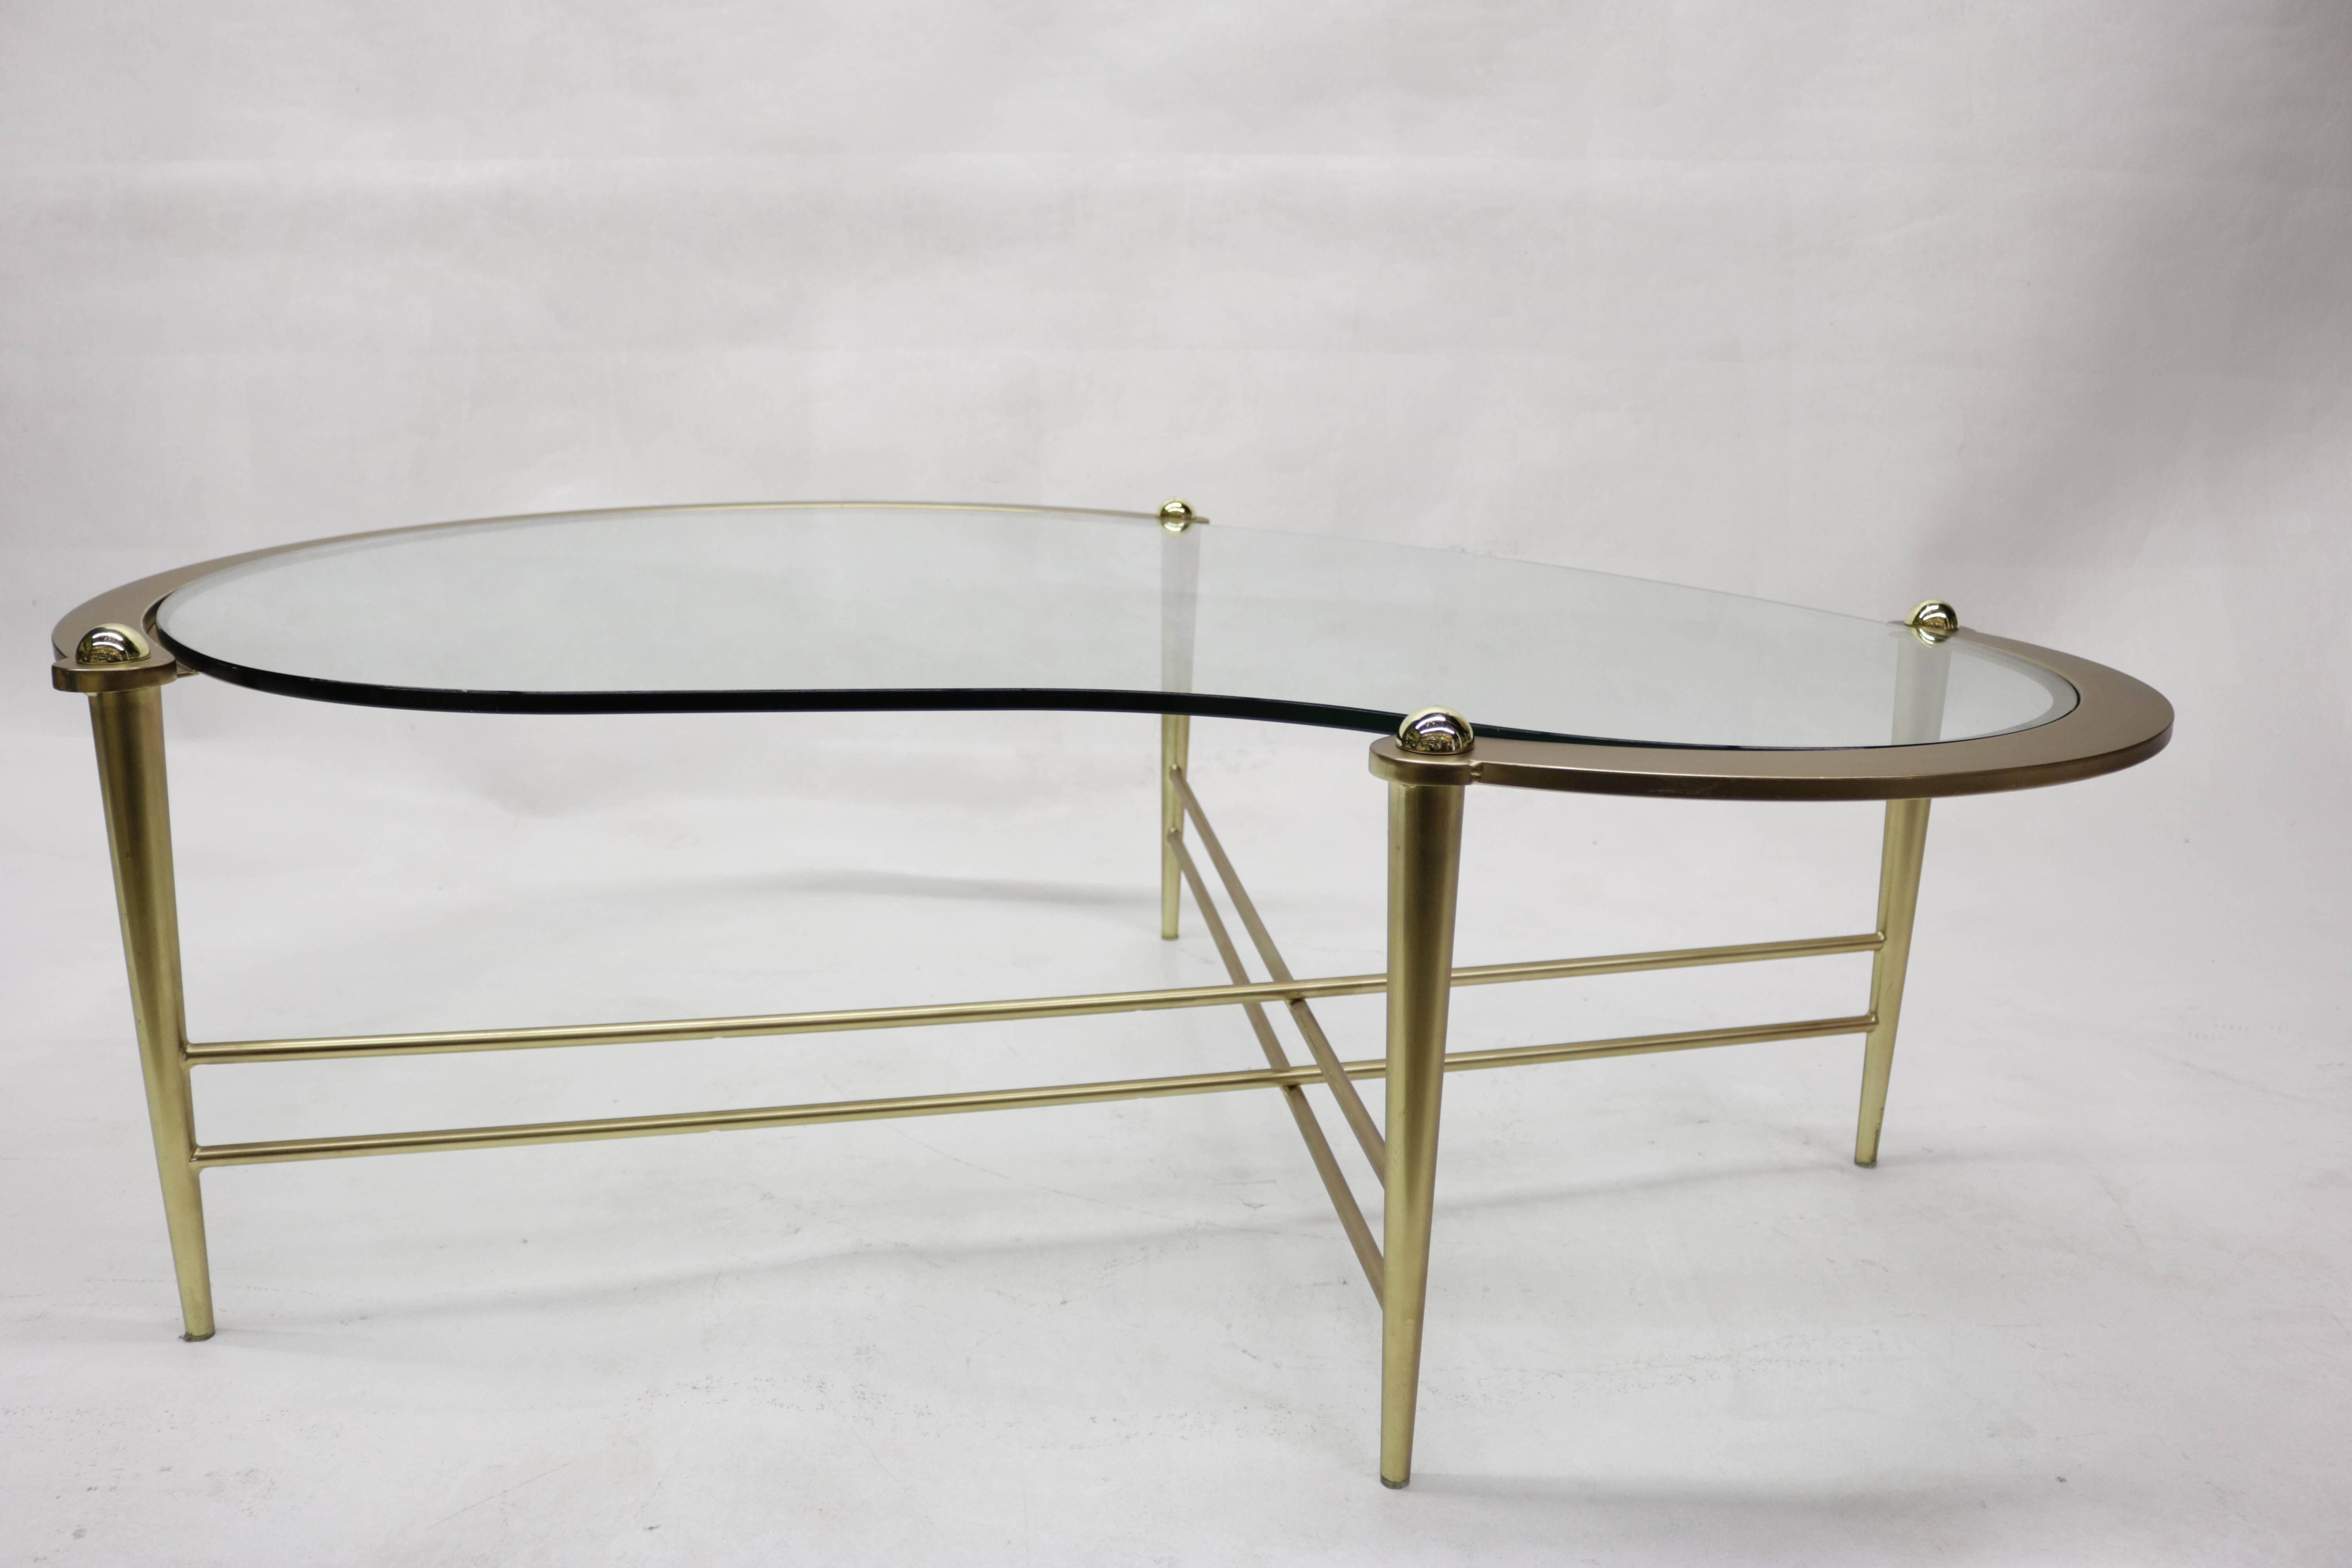 1960s coffee table has a kidney shaped glass top and delicate shaped gilded brass base.